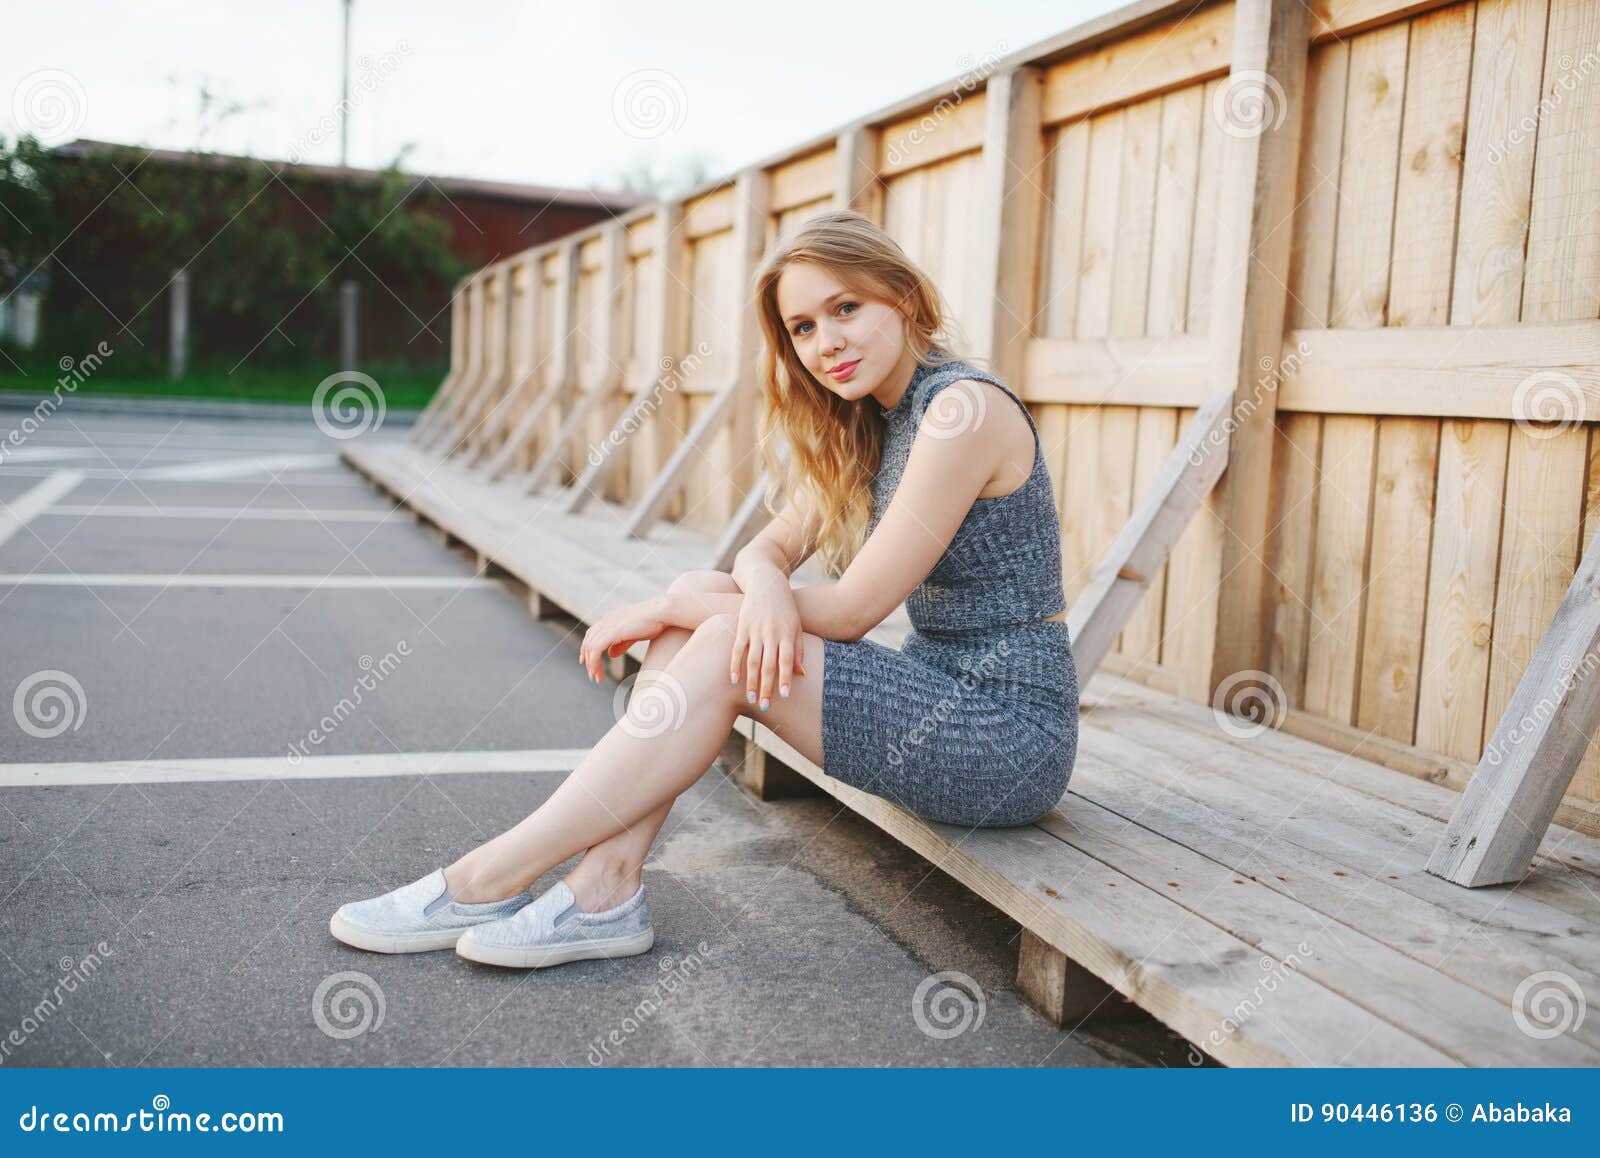 Blonde Stripper Girl Stock Photos and Images - Alamy - wide 7